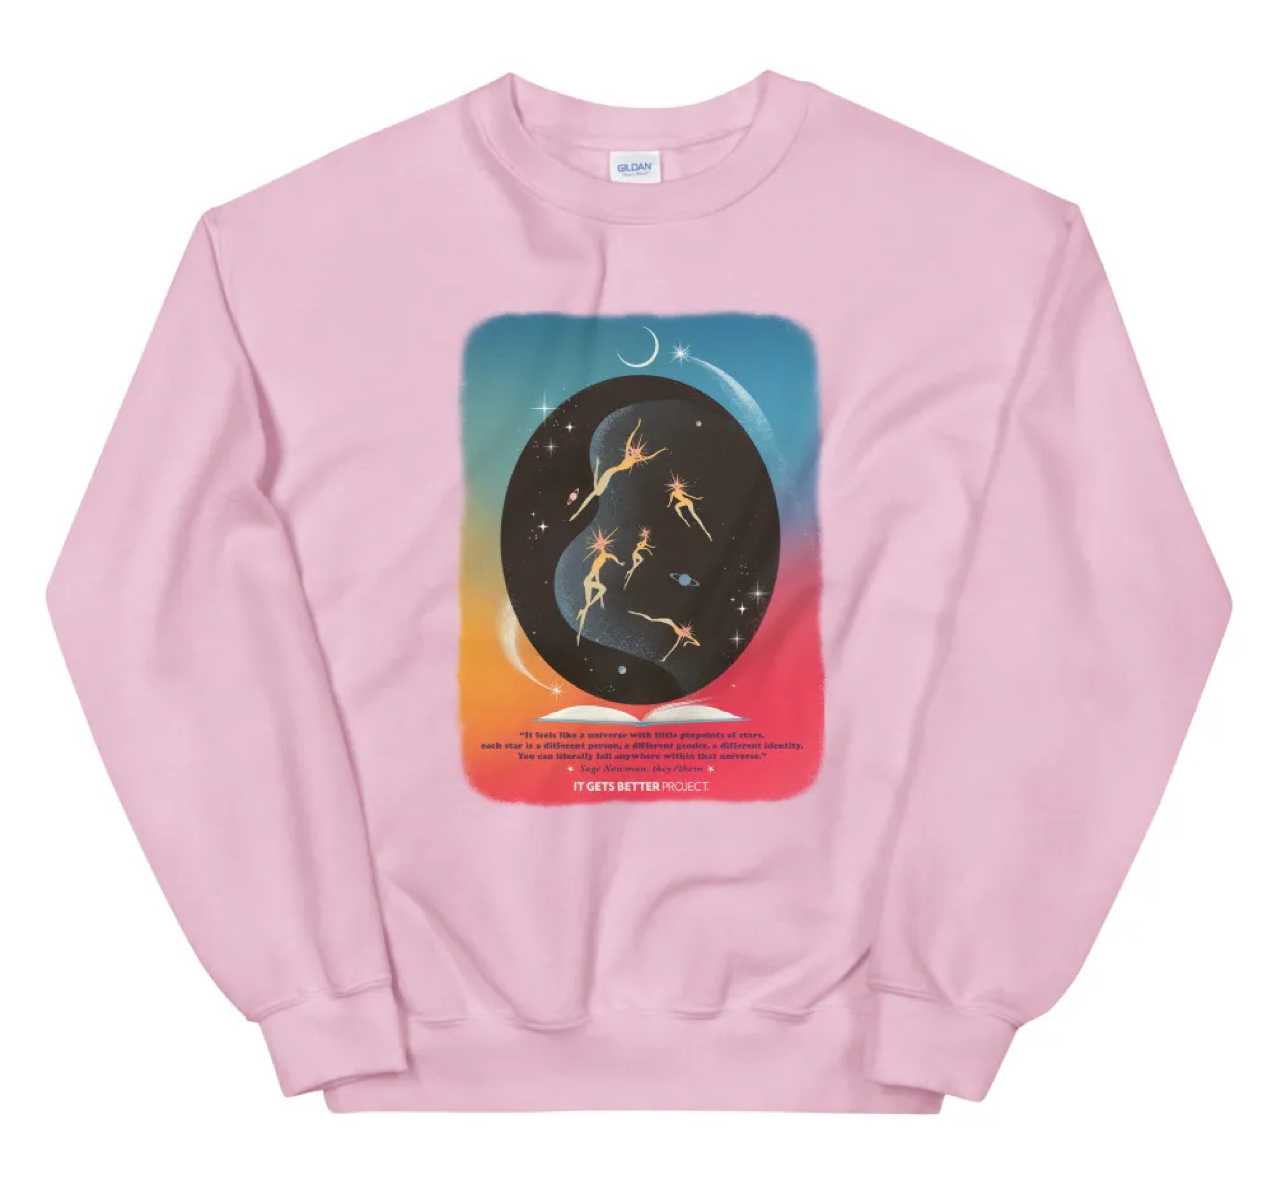 pink sweatshirt from the It Gets Better Project